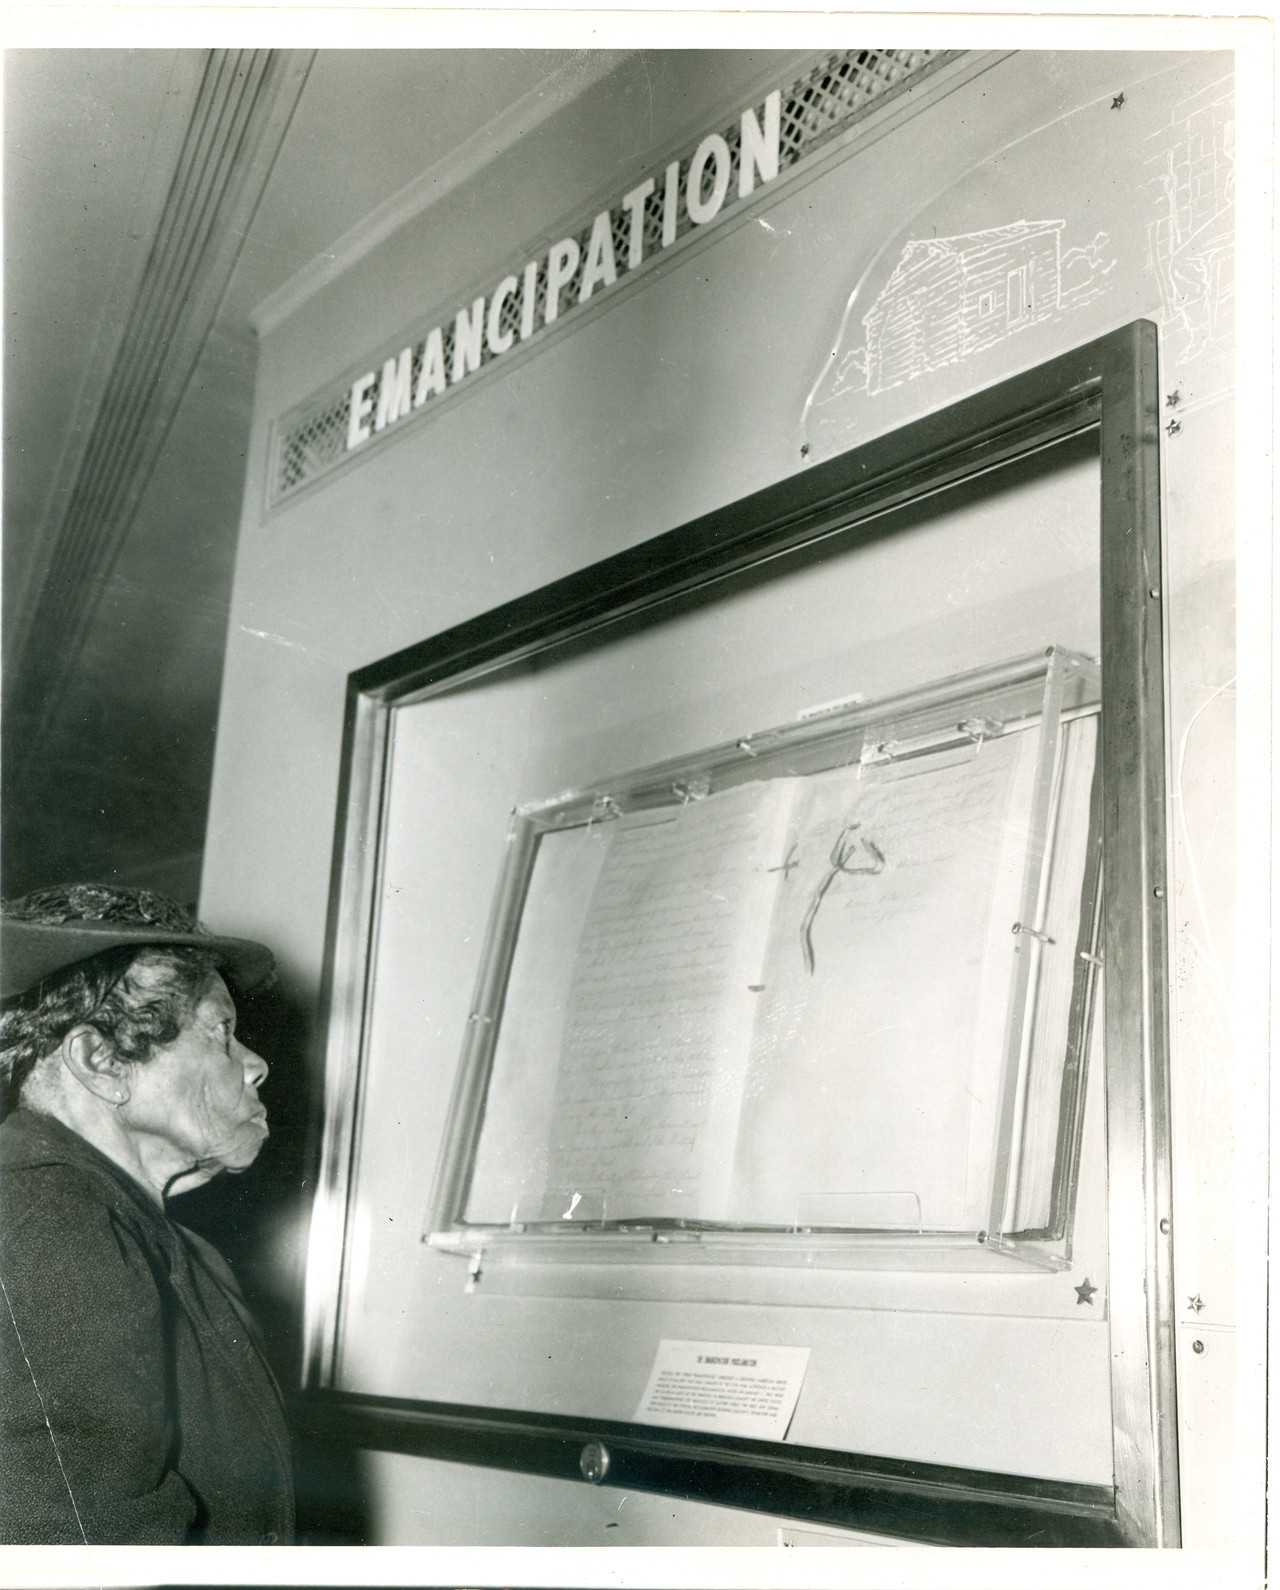 88-year-old Mrs. Sally Fickland, a former slave, looking at the Emancipation Proclamation in 1947, which was signed when she was 3